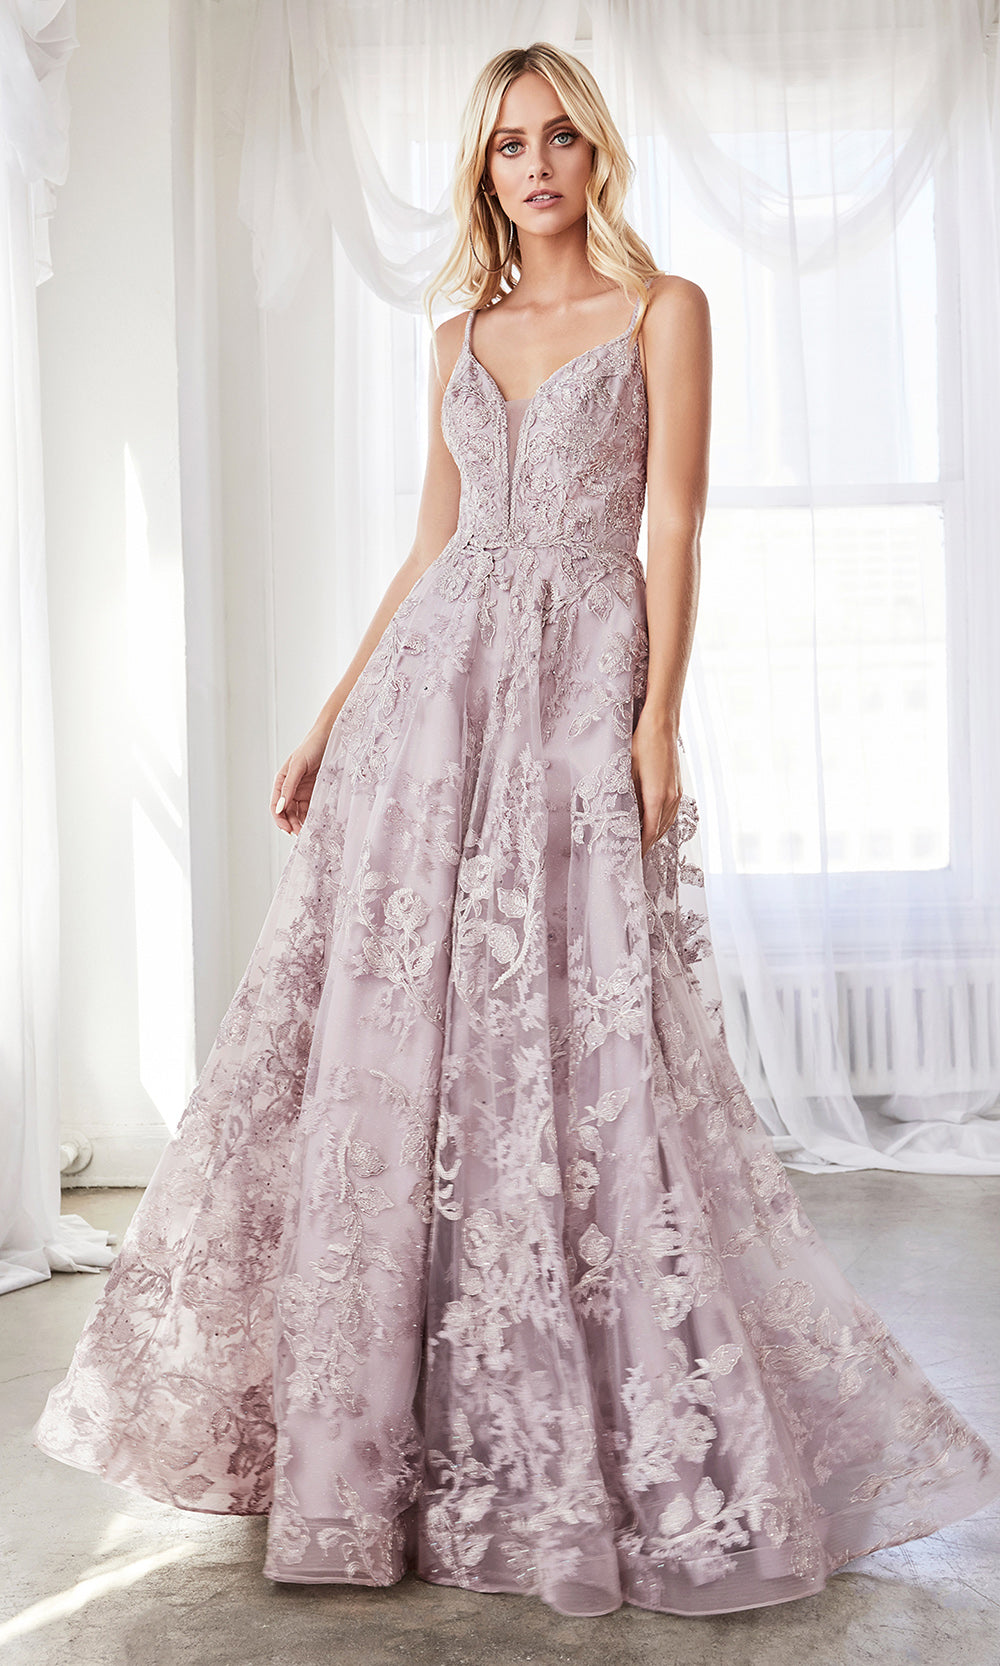 Cinderella Divine CD902 mauve v neck lace flowy dress w/straps. Perfect mauve tulle lace dress for prom, wedding reception or engagement dress, indowestern gown, sweet 16, debut, quinceanera, formal party dress. Plus sizes avail.jpg